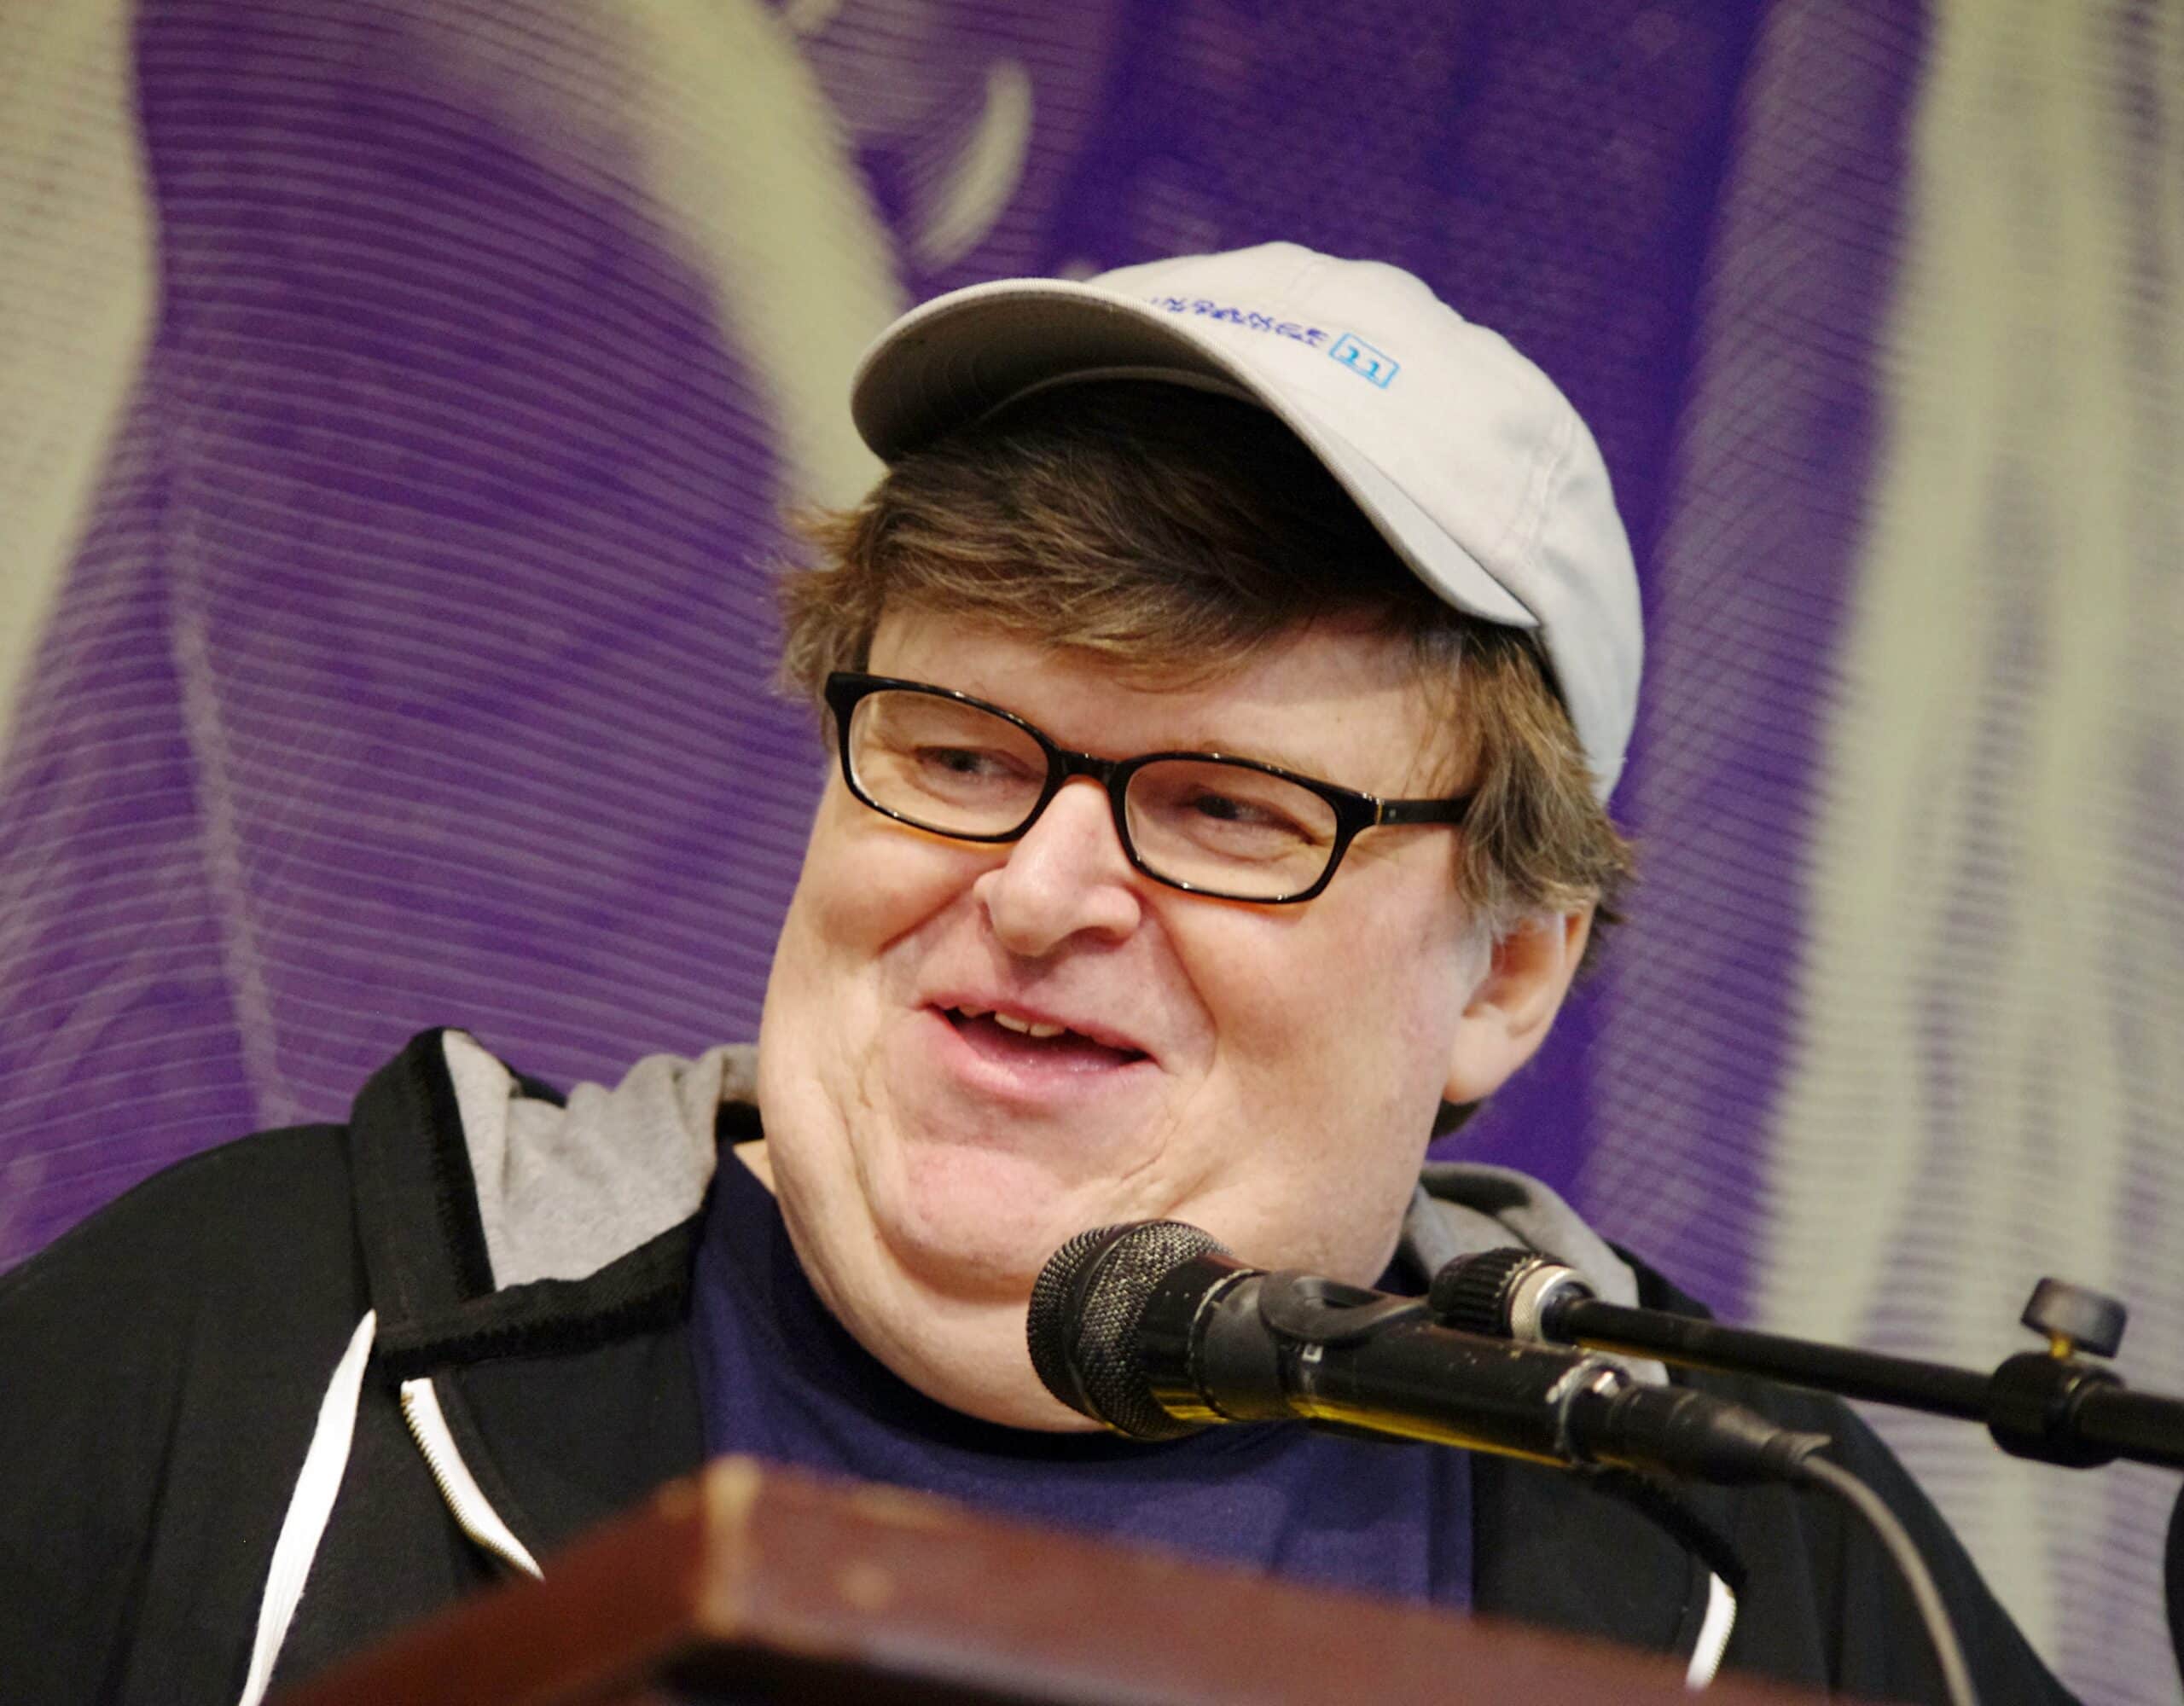 Michael Moore Proposes New Amendment to ‘Repeal and Replace’ the Second